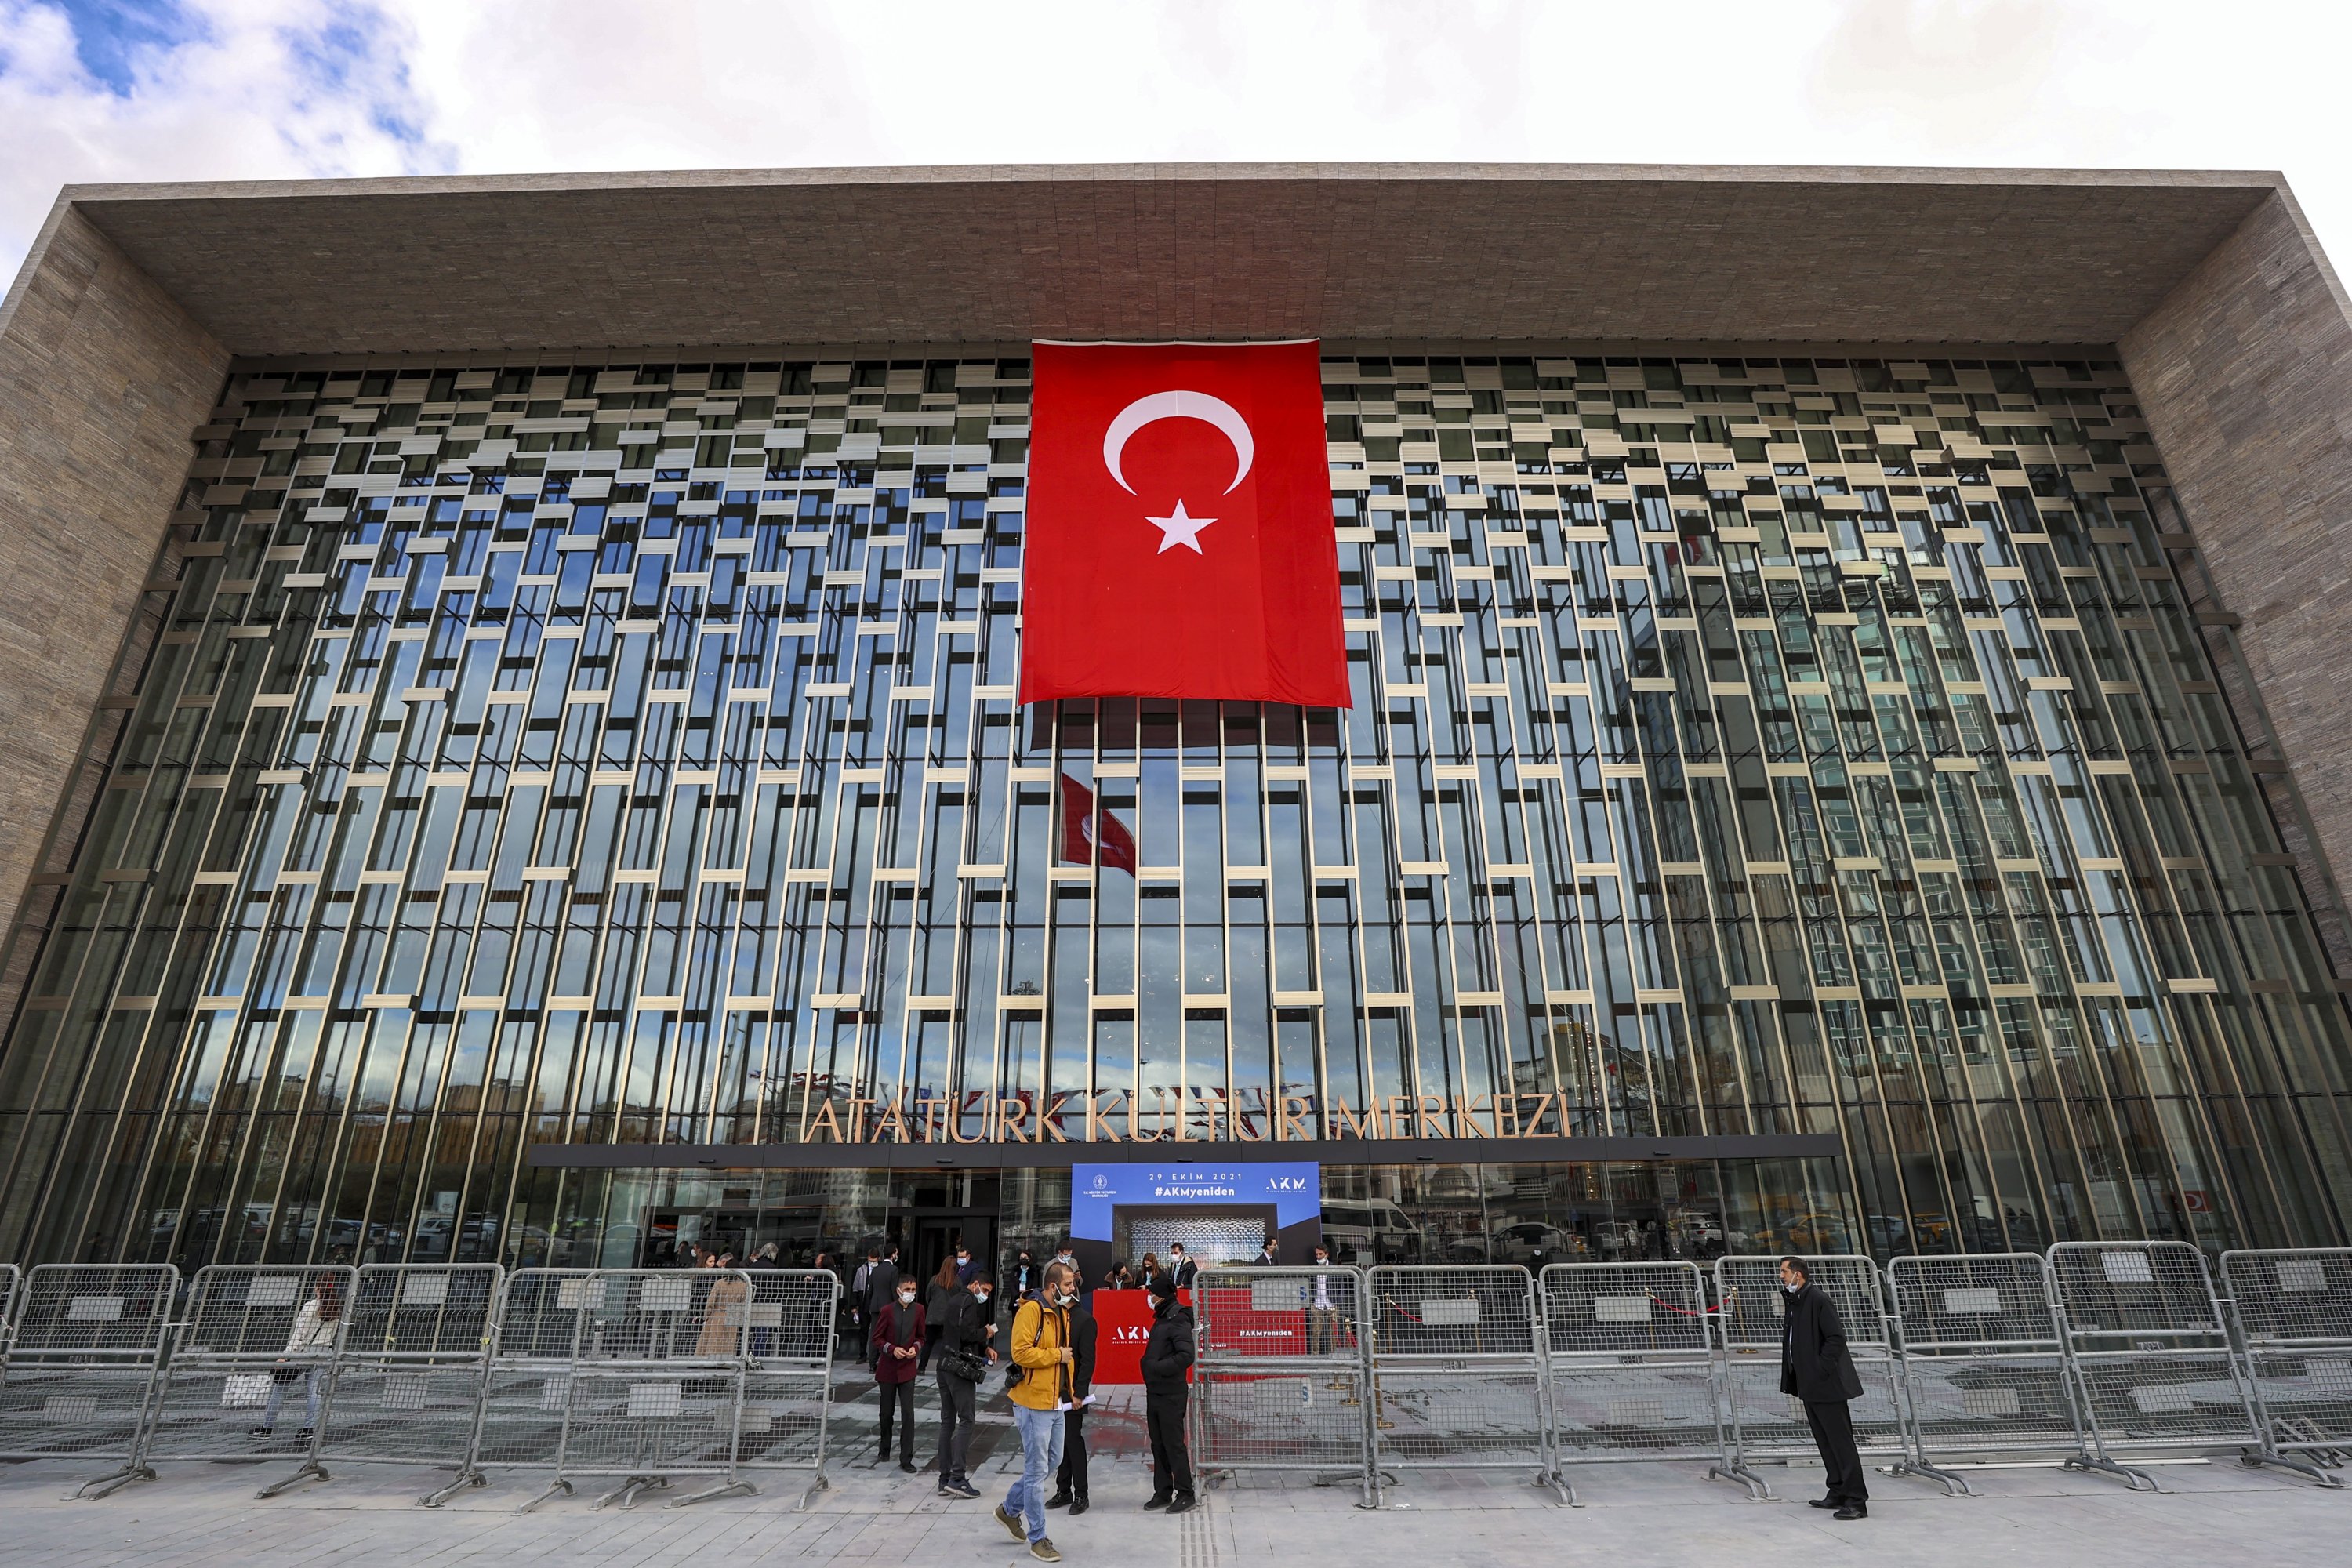 Istanbul welcomes rebuilt iconic culture center AKM | Daily Sabah